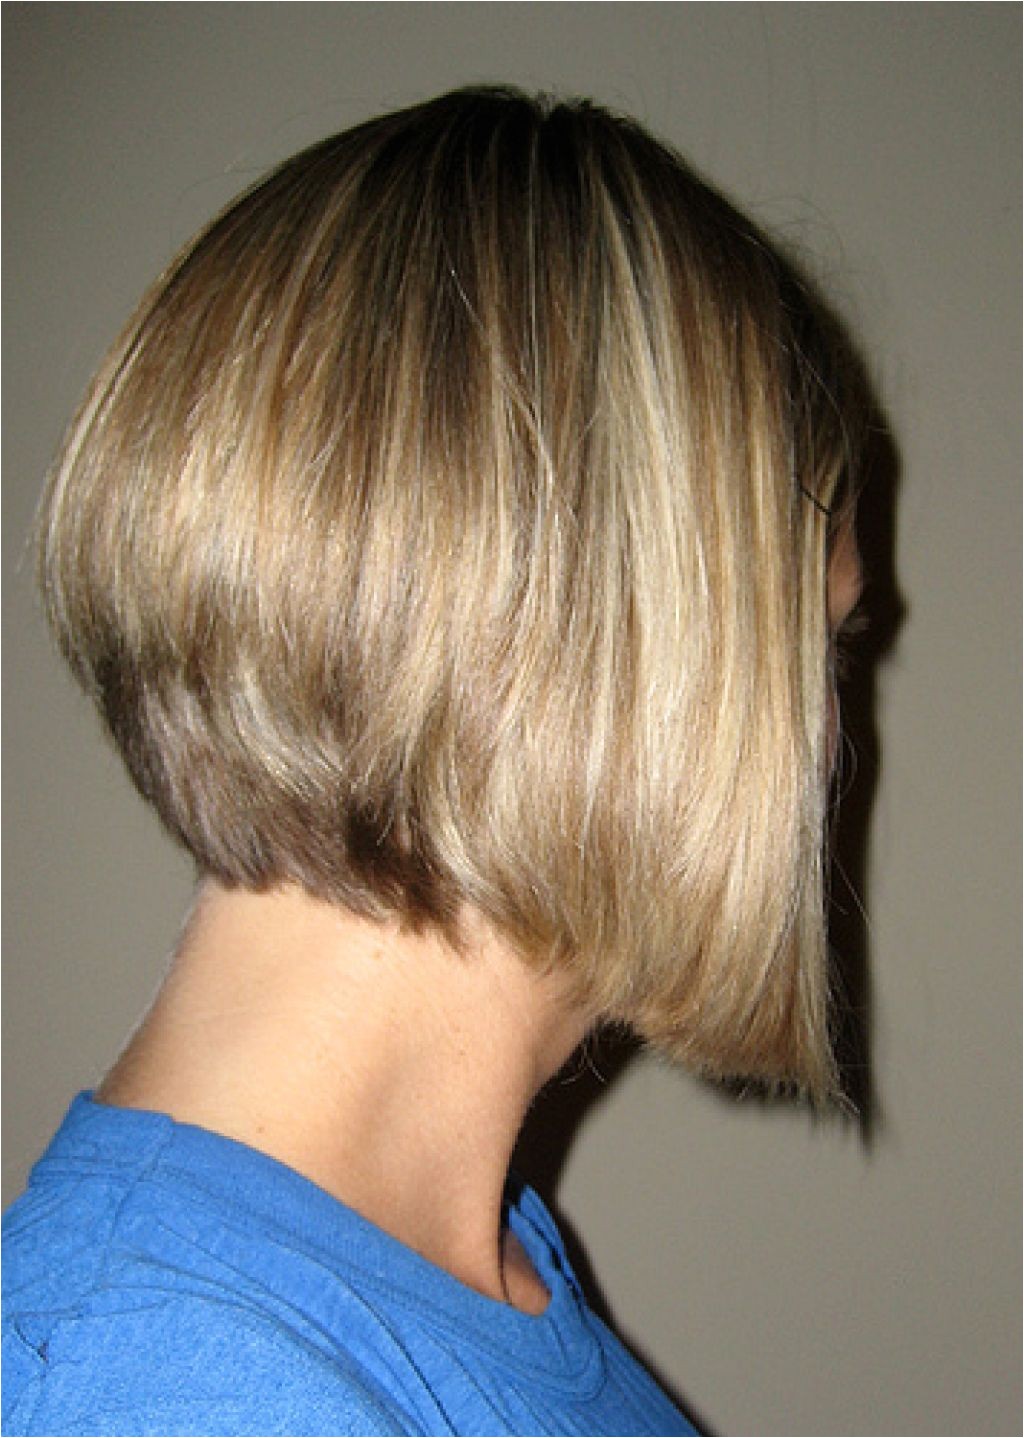 one checklist that you should keep in mind before attending angled bob haircut angled bob haircut